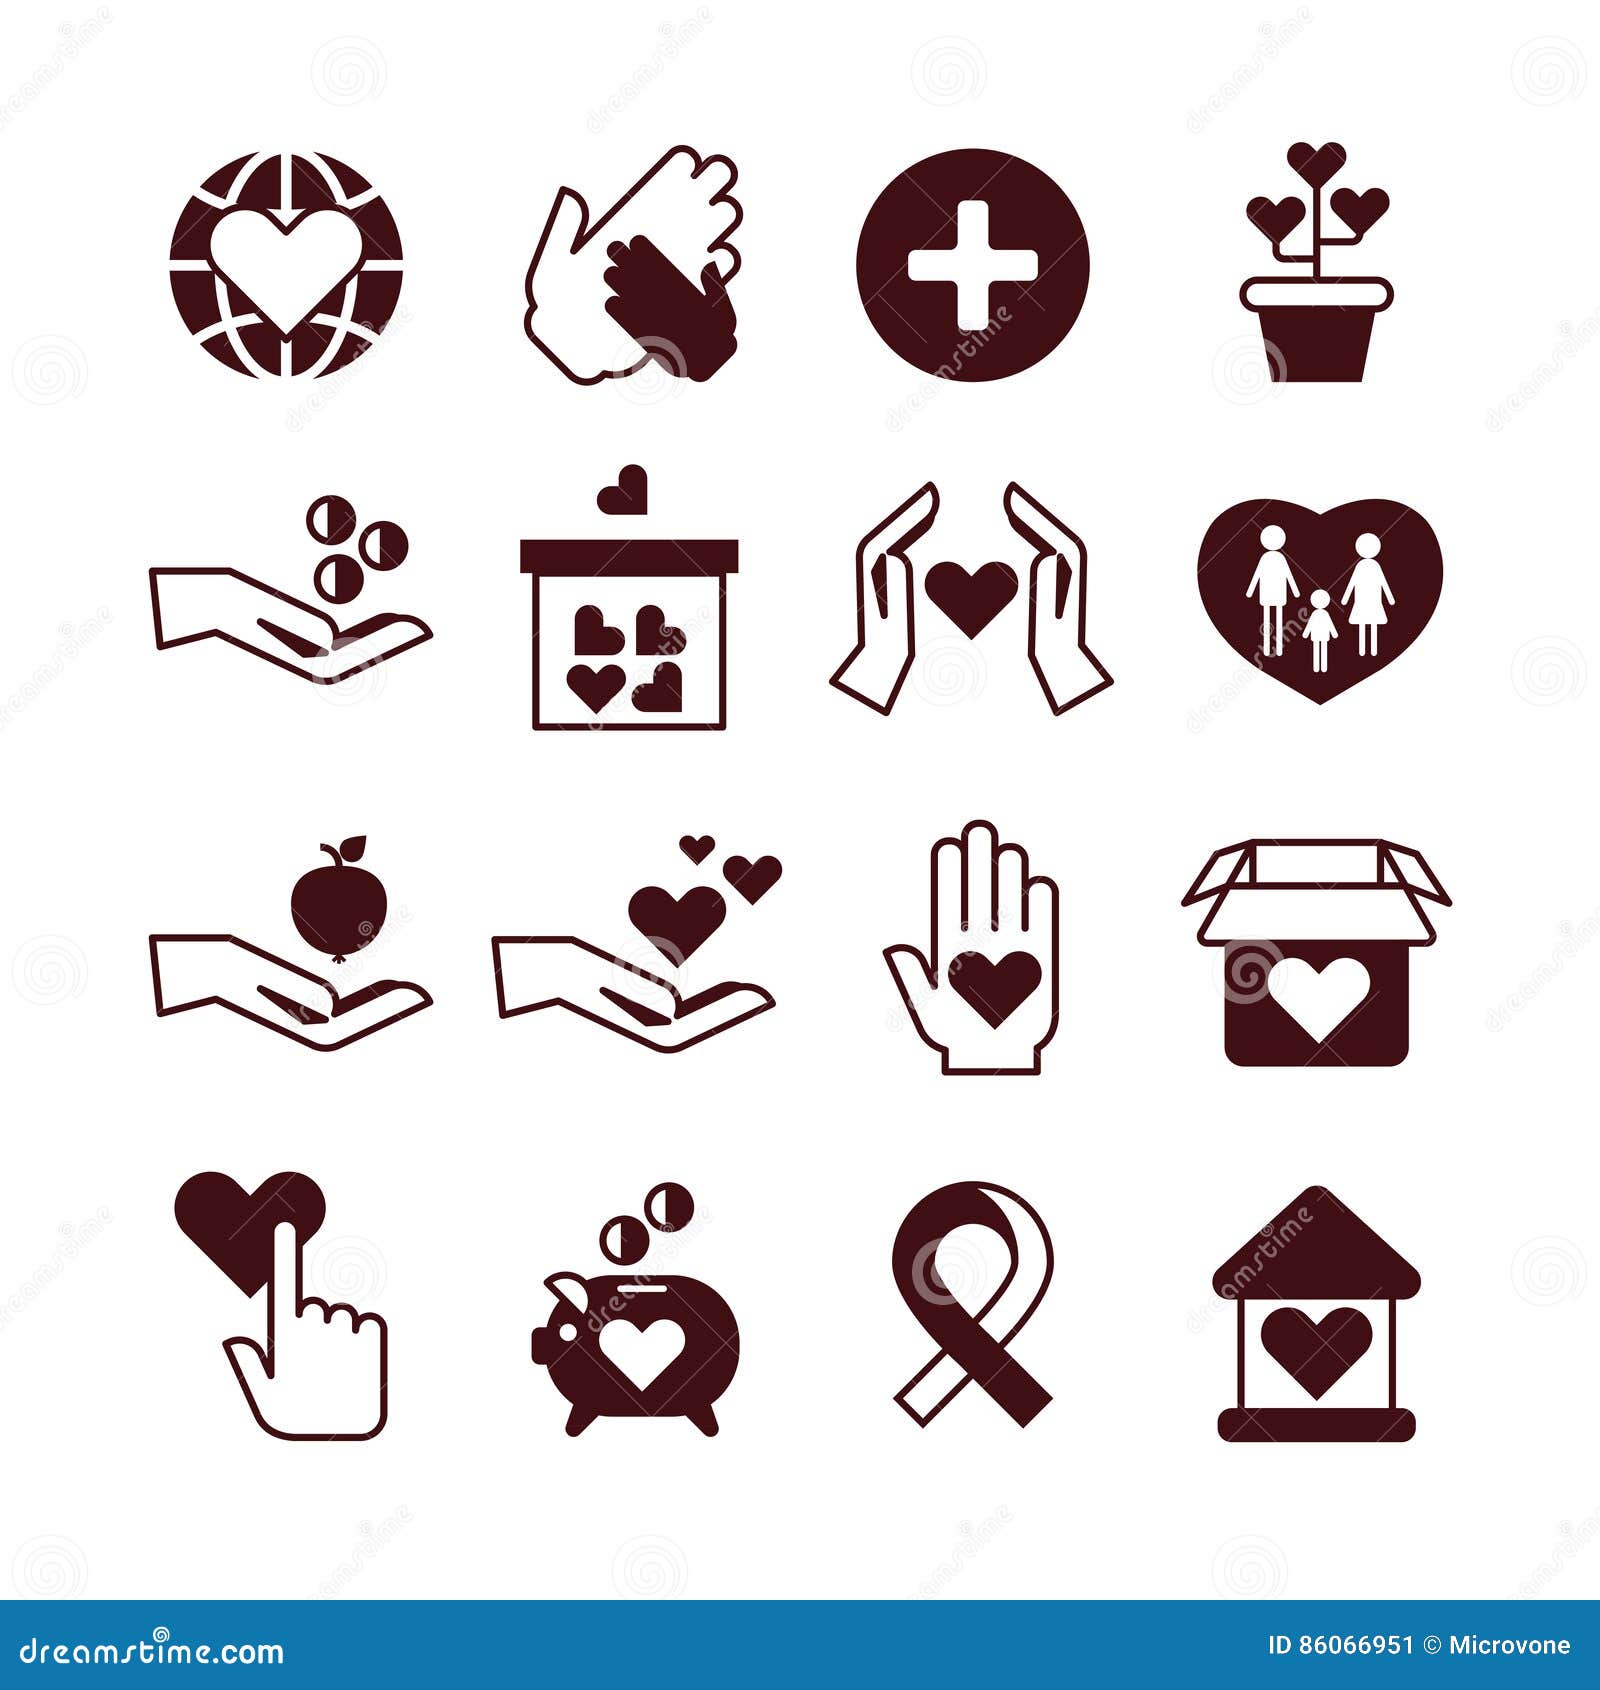 charity hands, care and protection, fundraising service, donation, nonprofit organization, affection  icons